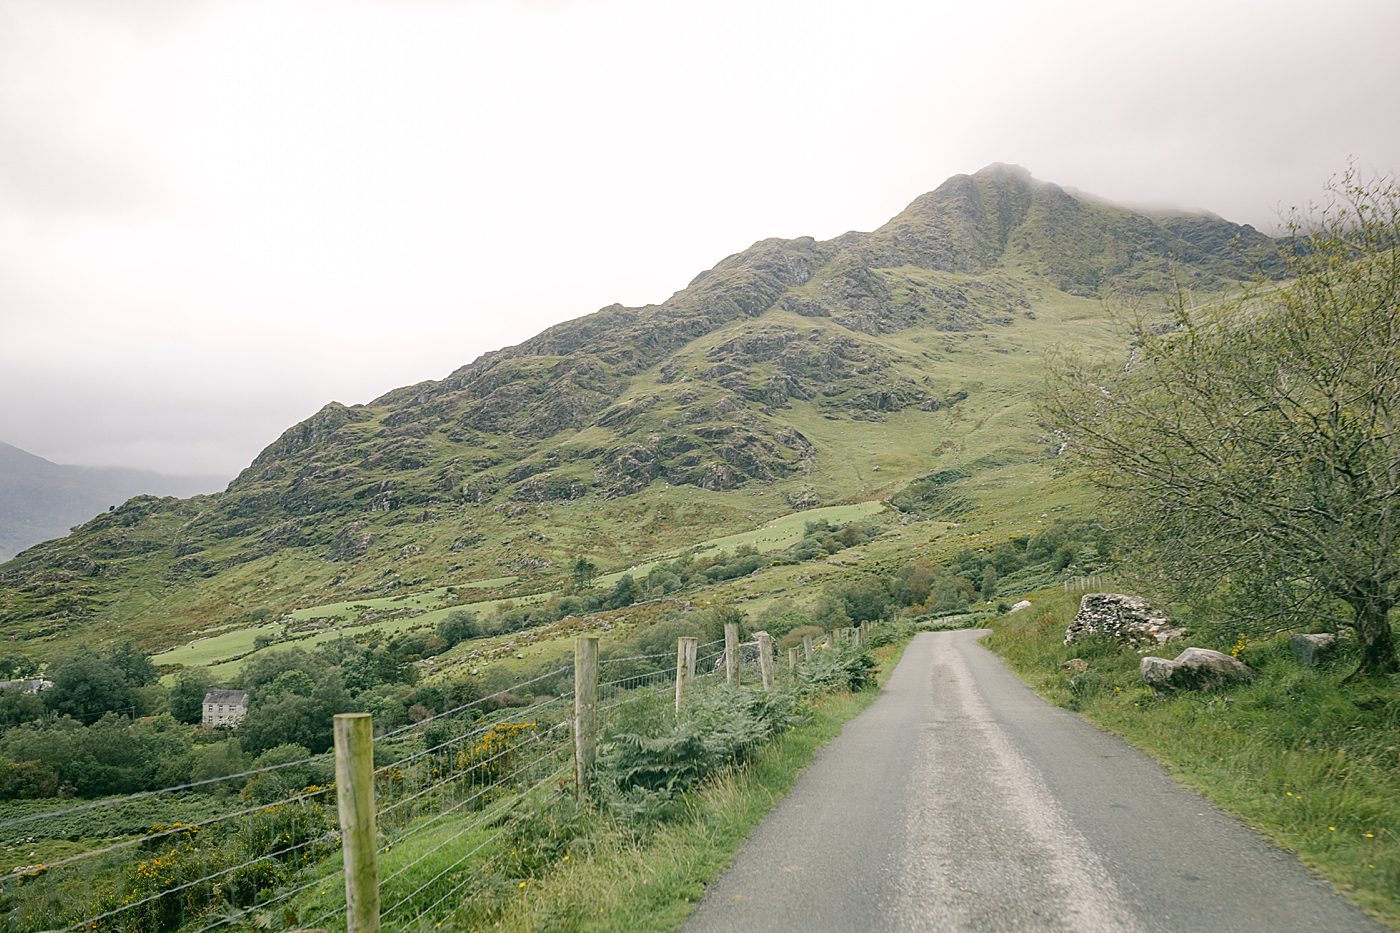 Road going through the mountains in Ireland | Photo by Destination Wedding Photographer Hope Helmuth